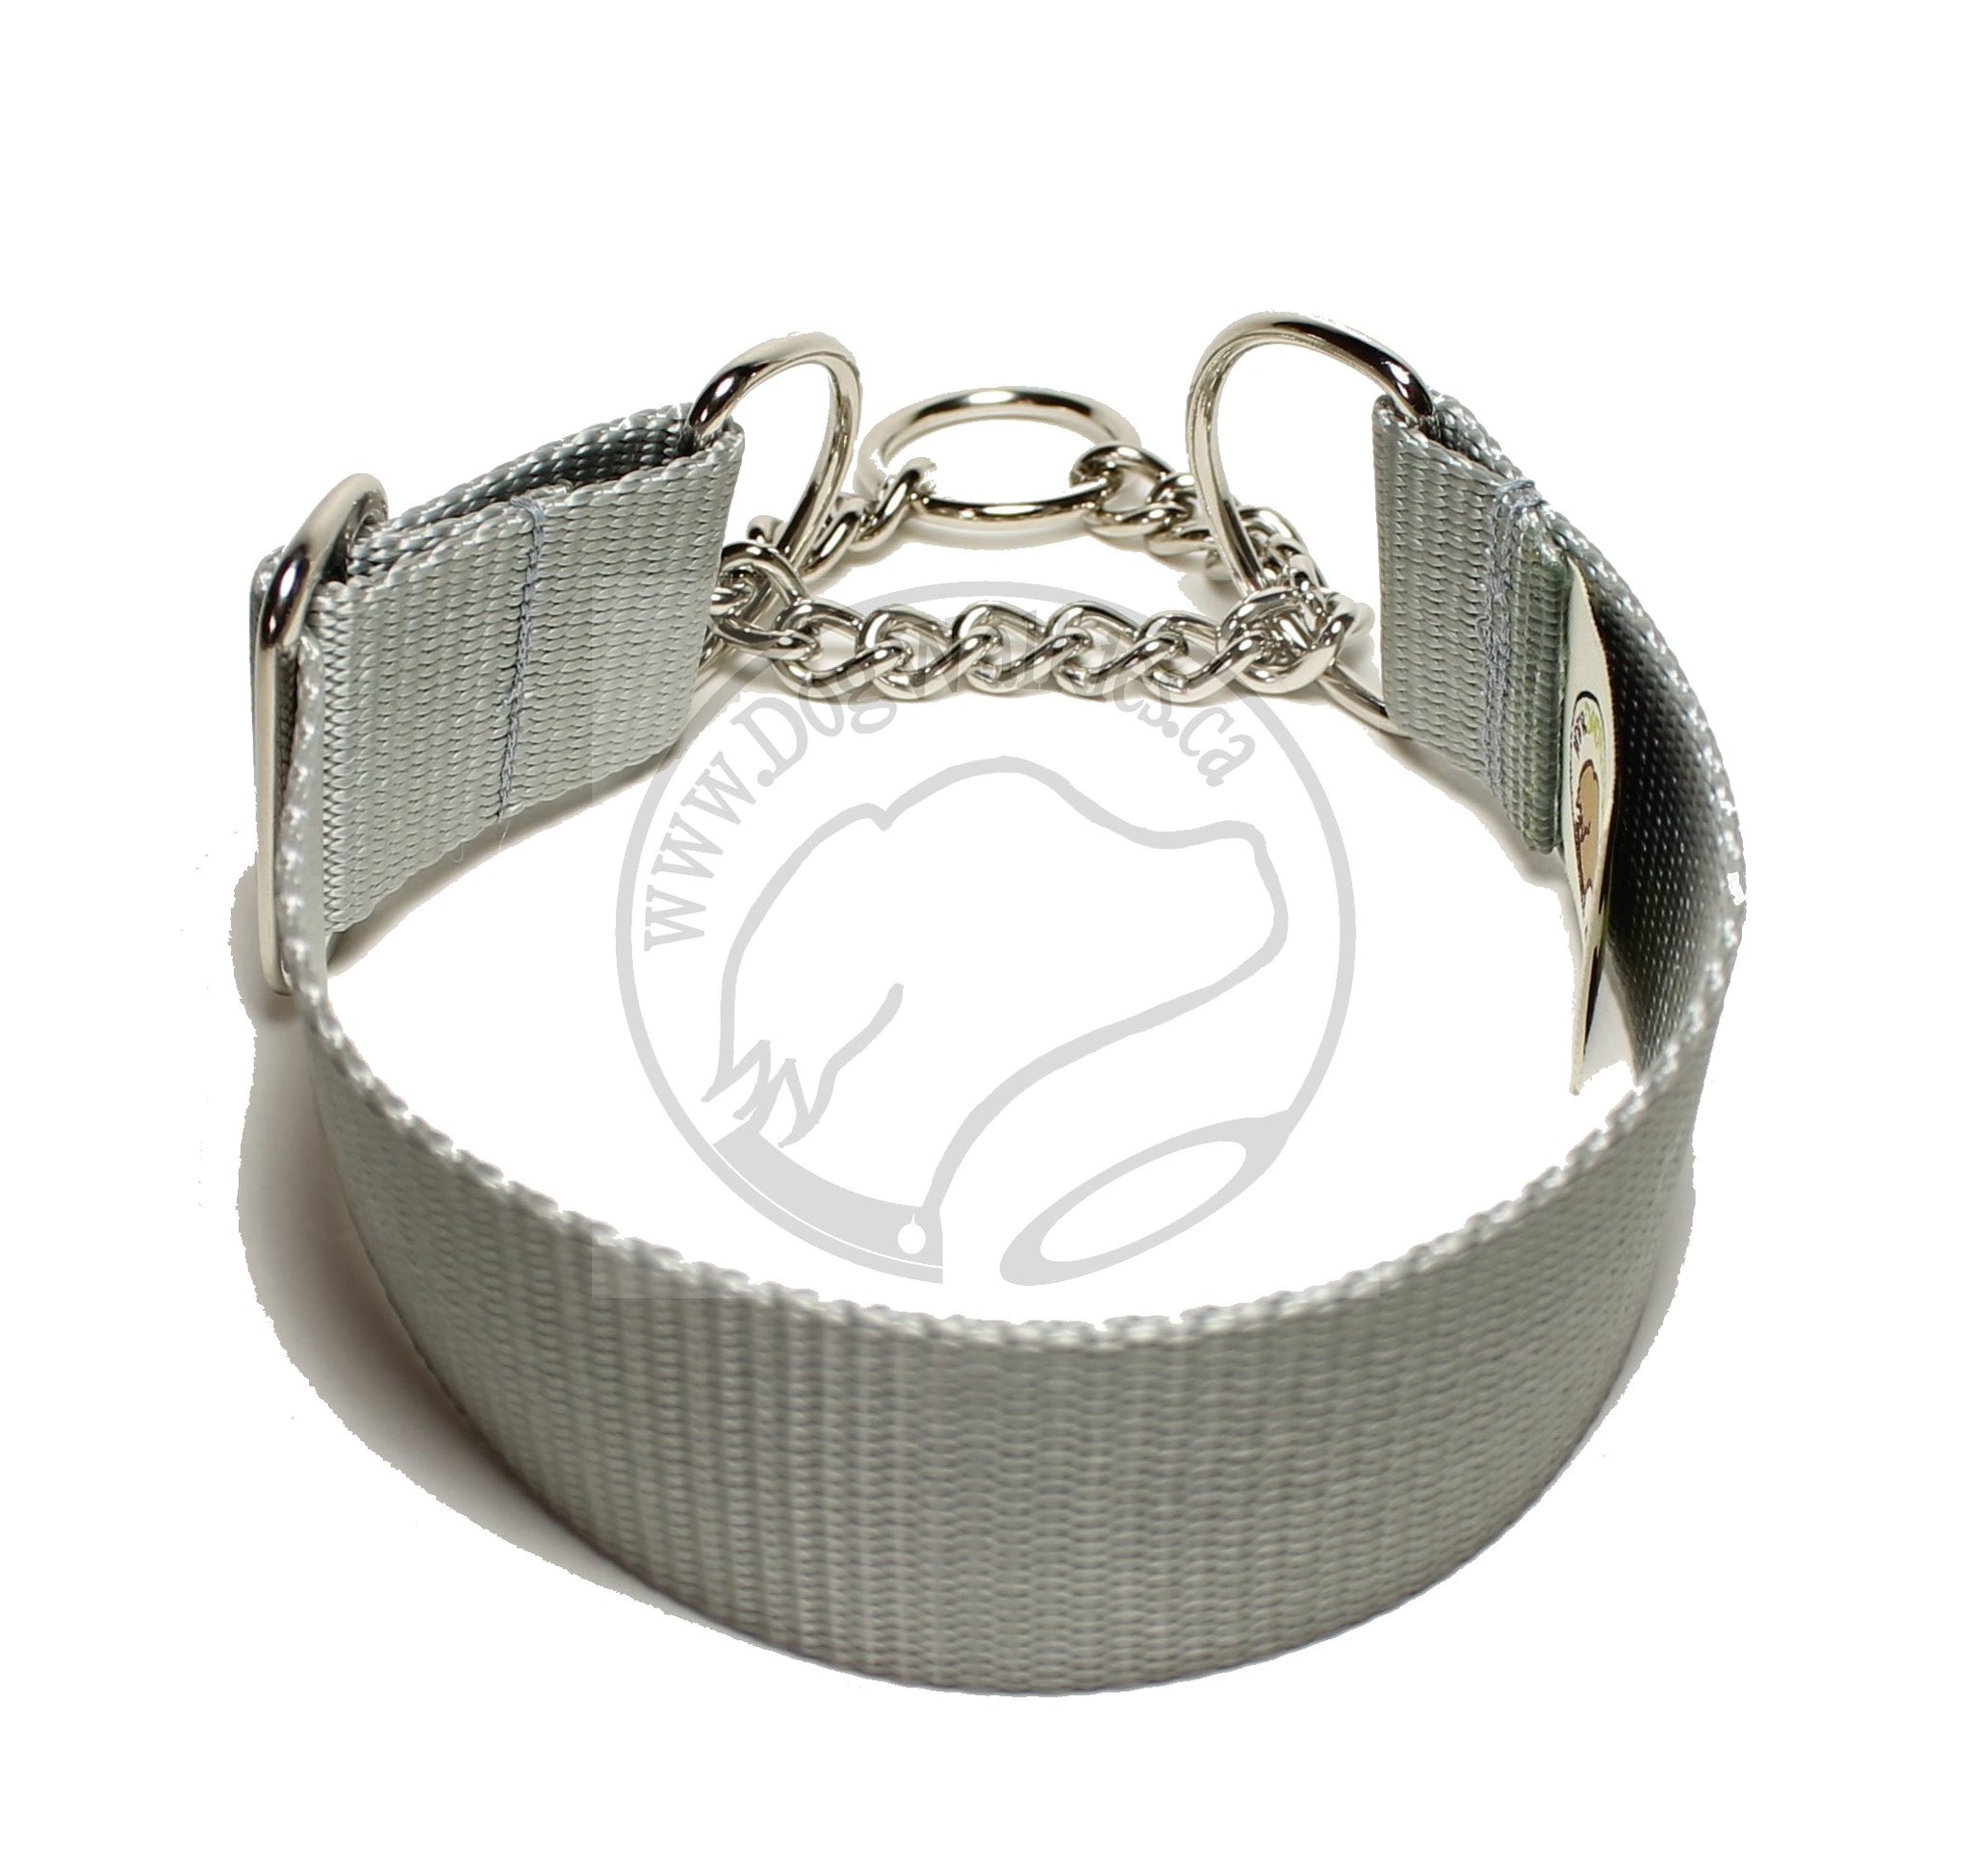 Wide Chain Martingale Dog Collar 1.5" (38mm); Simple - Elegant - Strong